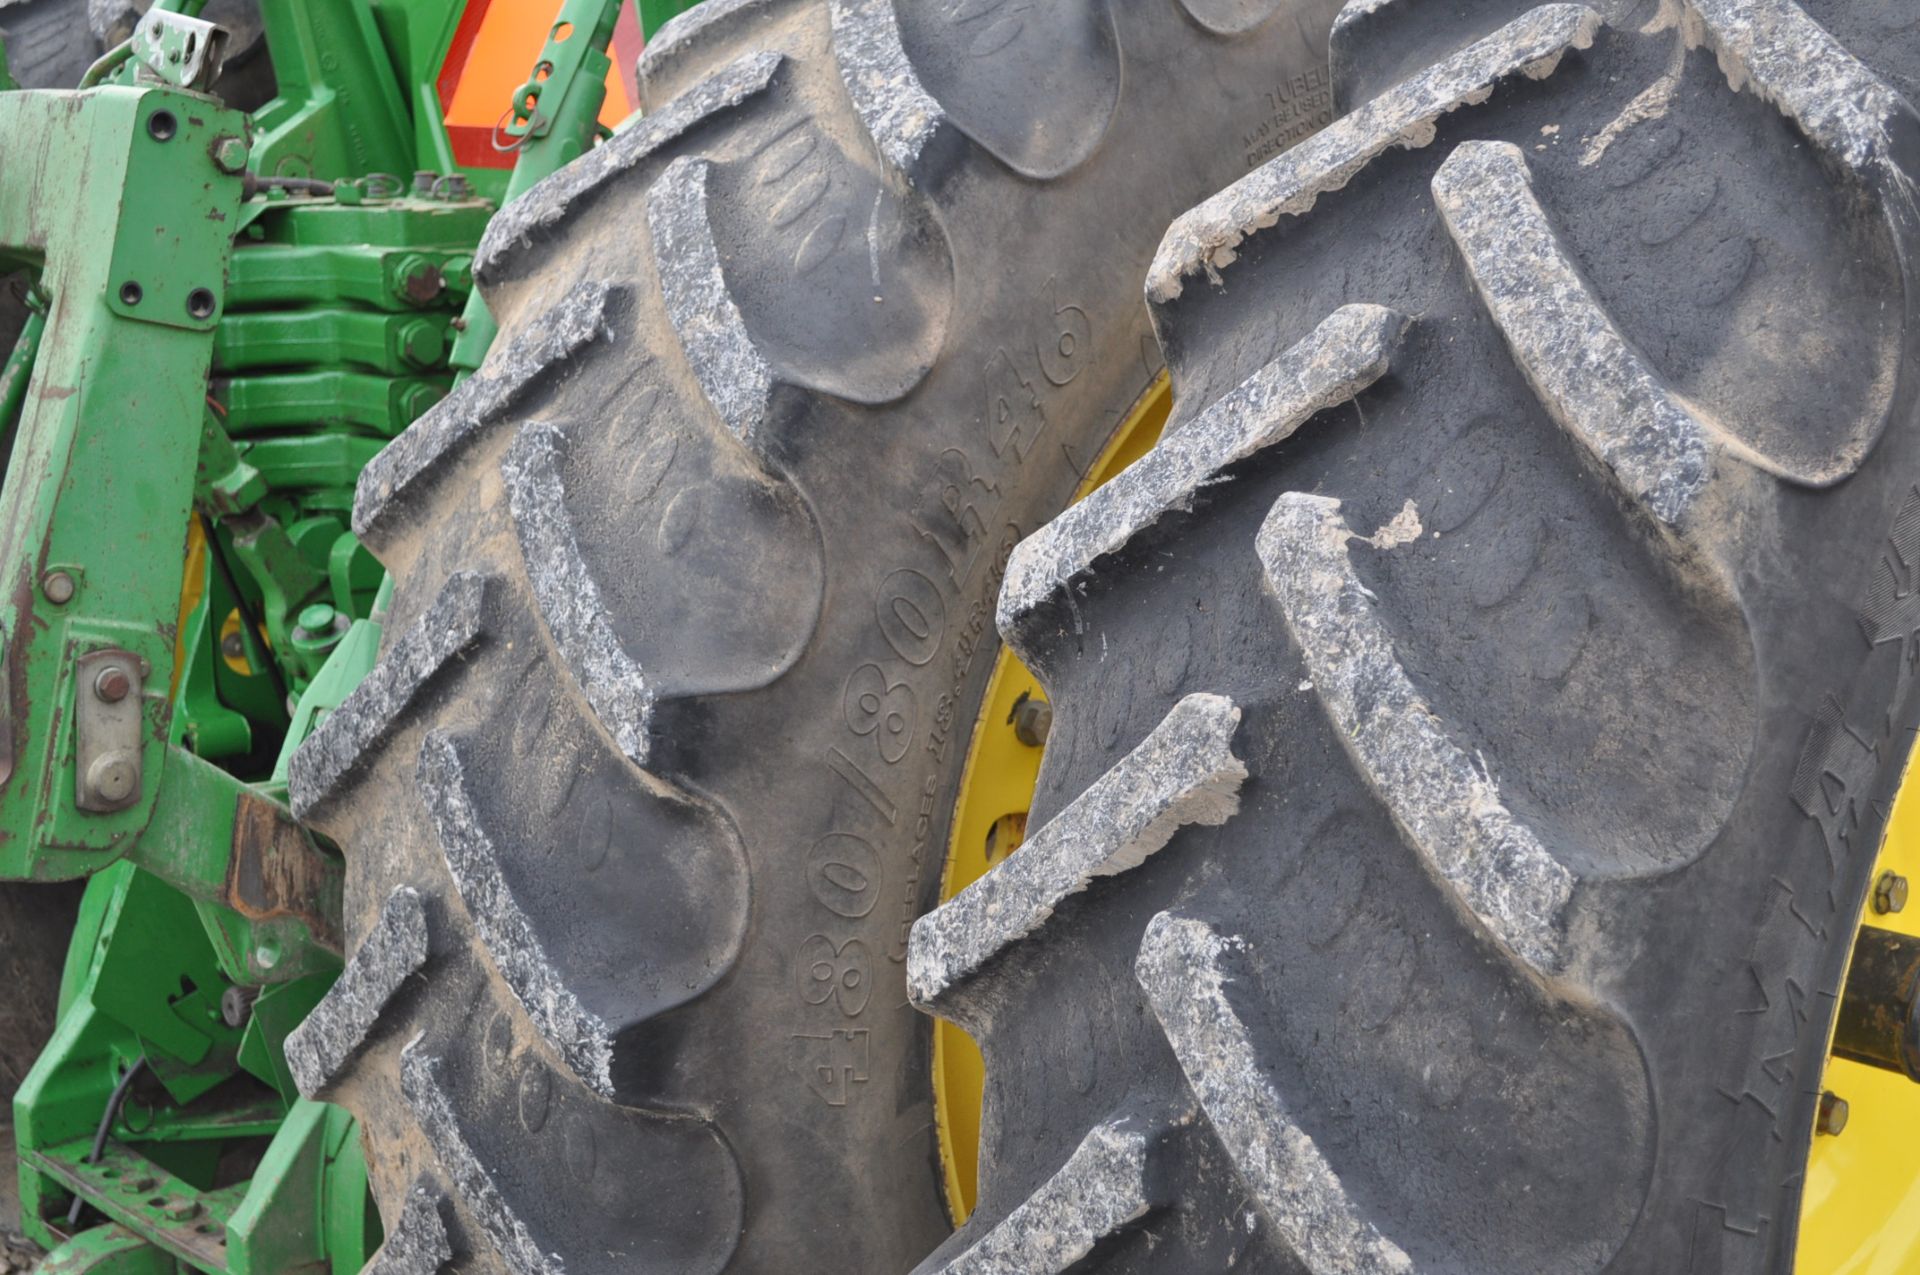 John Deere 8300 tractor, MFWD, 480/80 R 46 duals, 380/85 R 34 front, fenders, front wts, 4 hyd - Image 7 of 21